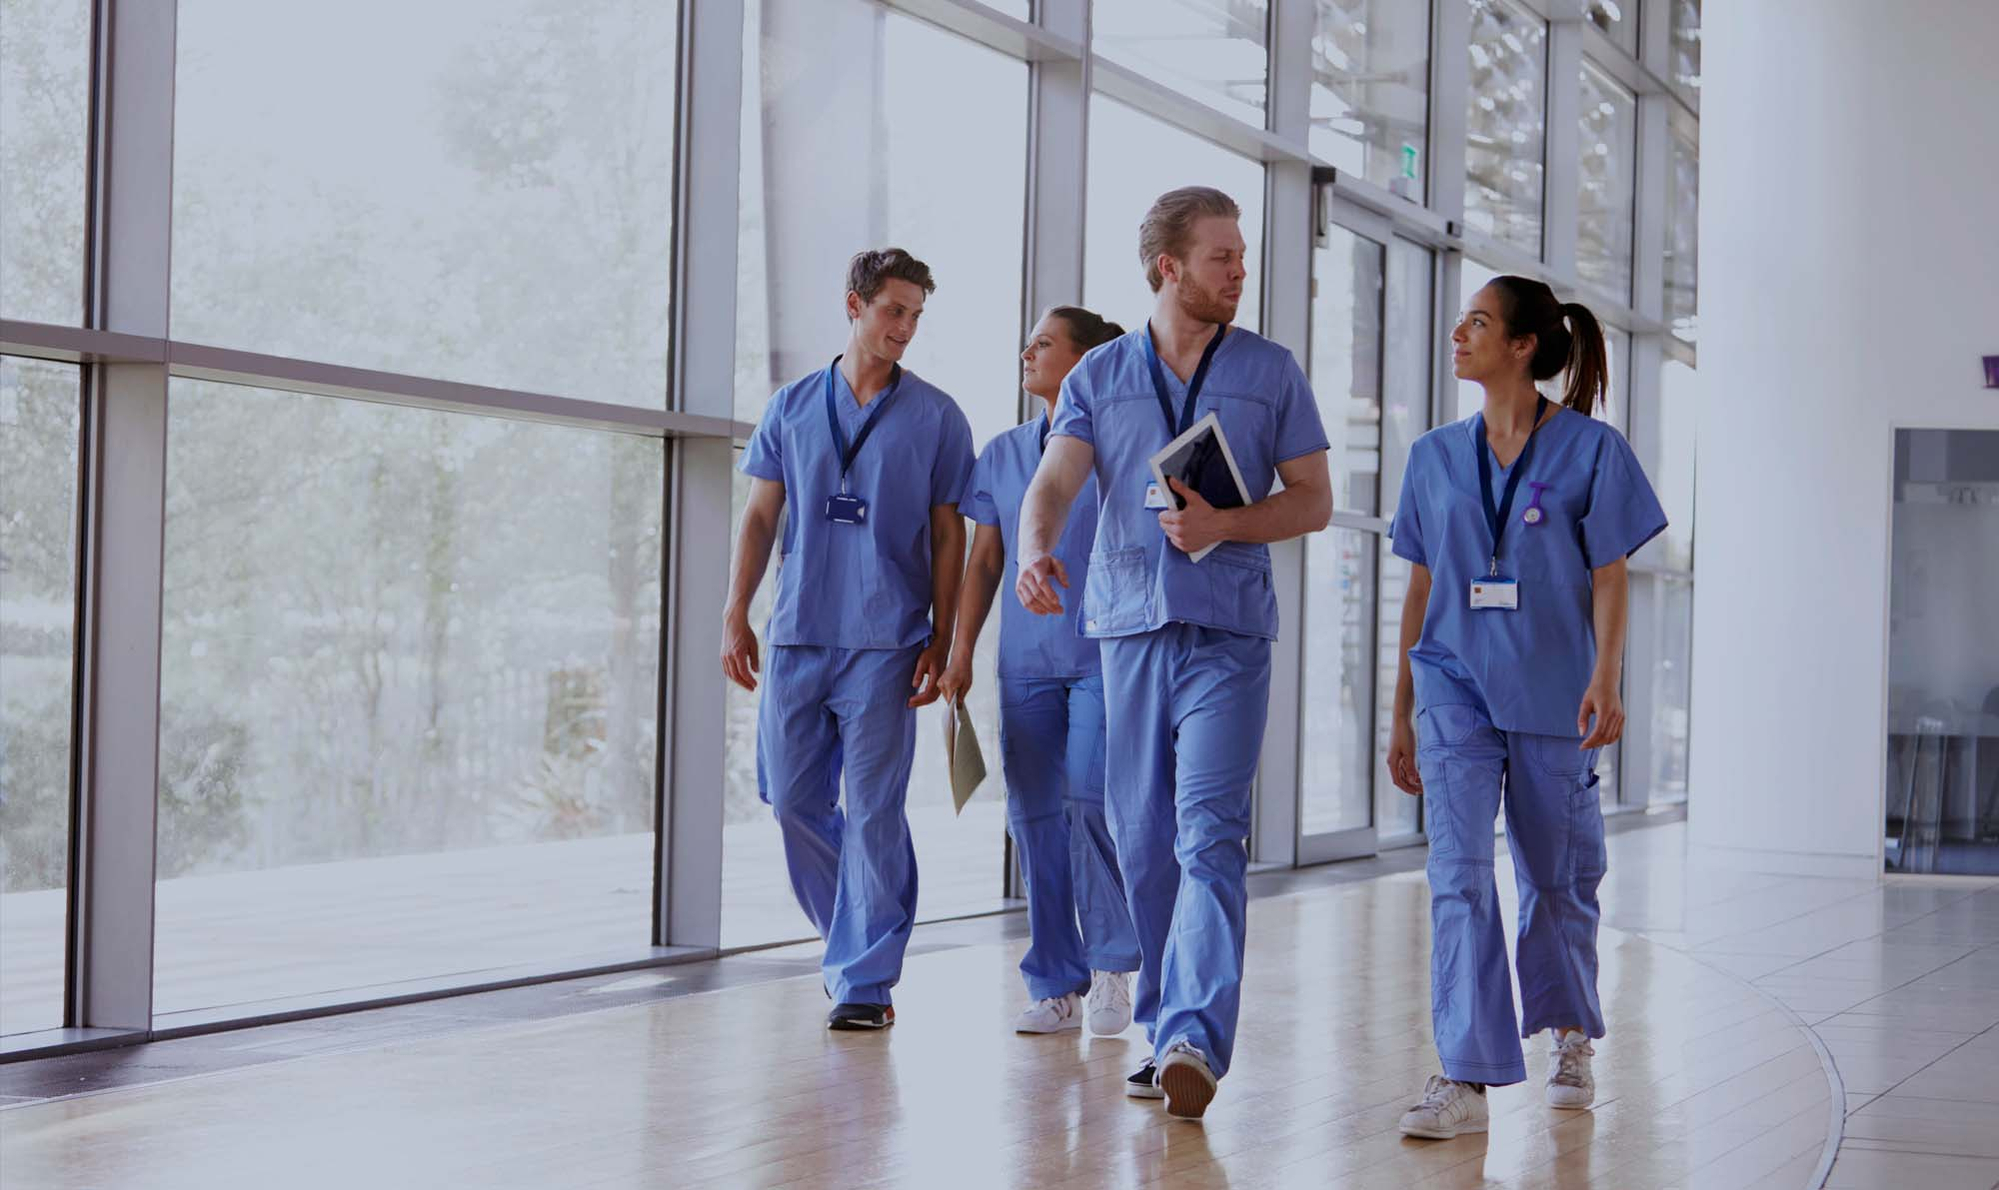 Image shows a group of medical students walking down a hospital corridor 